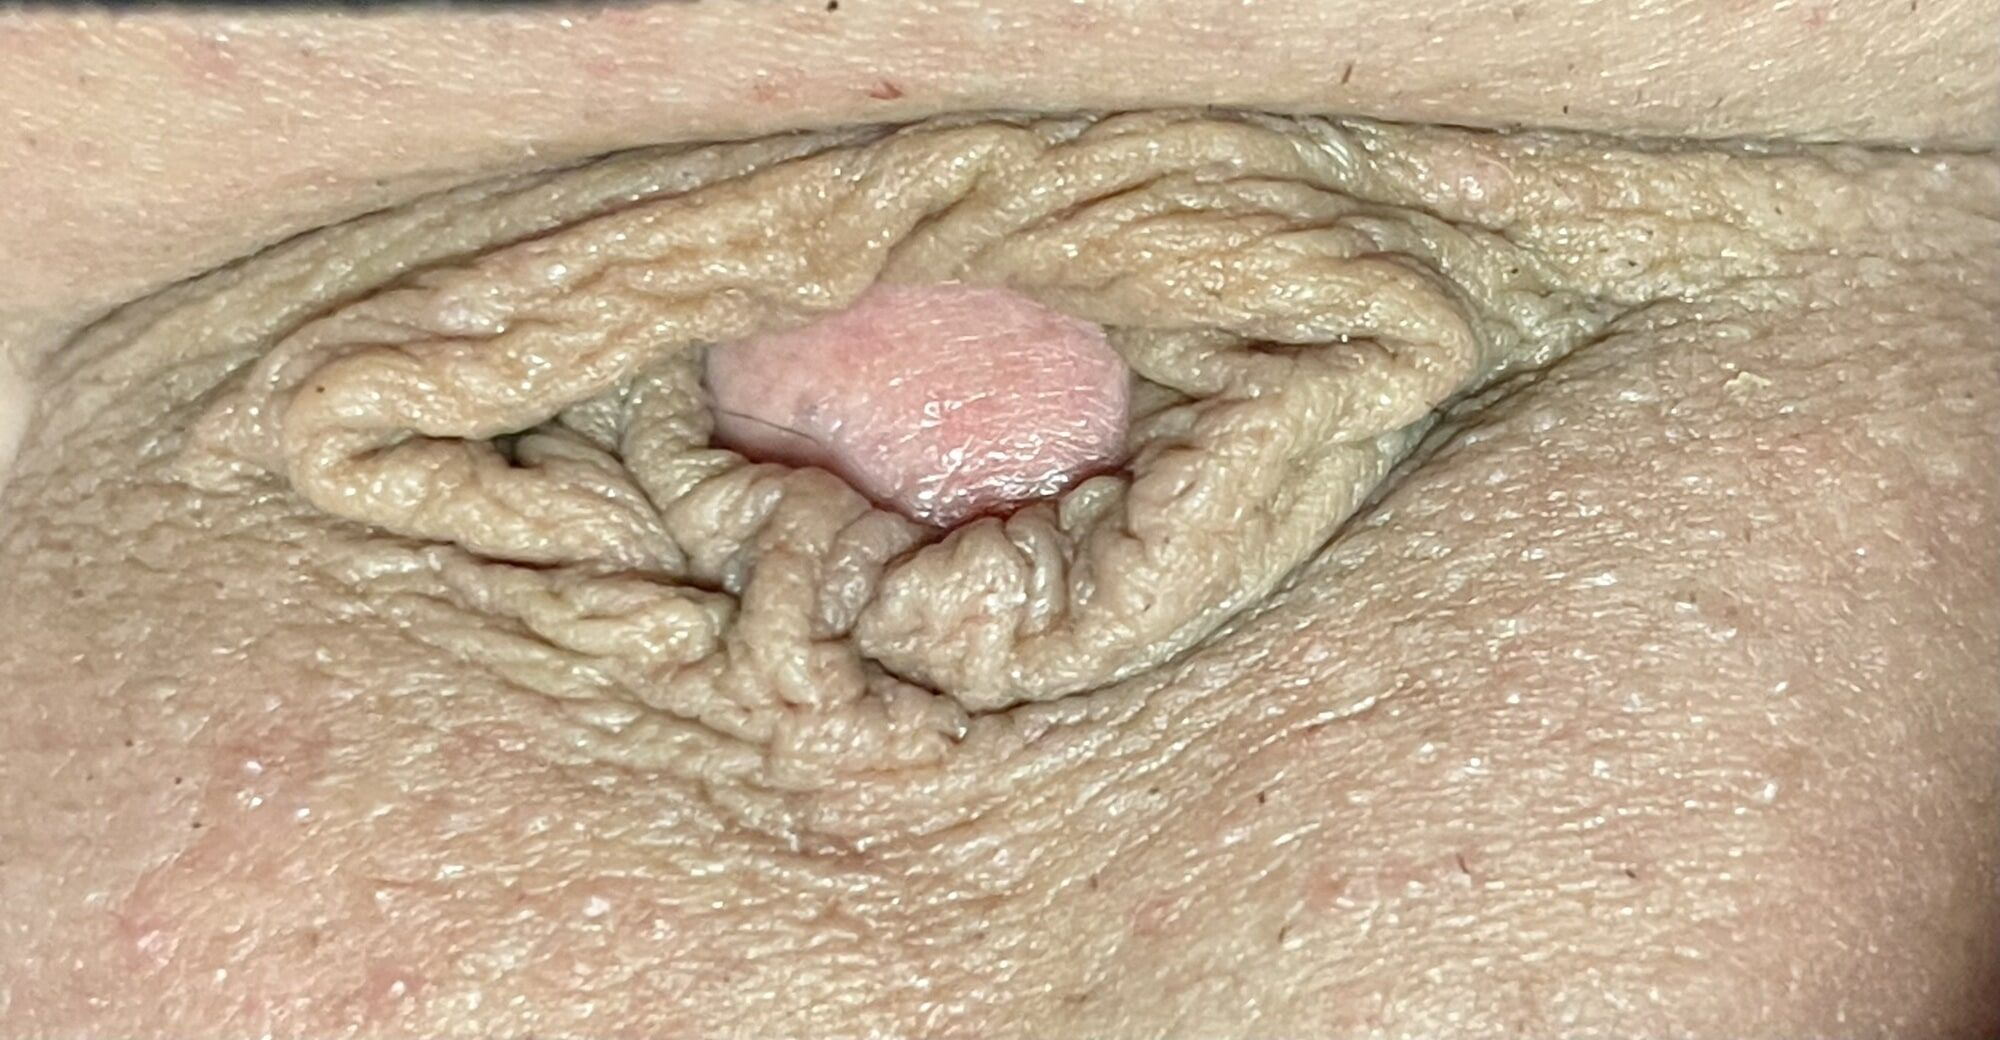 Micropenis close up #13